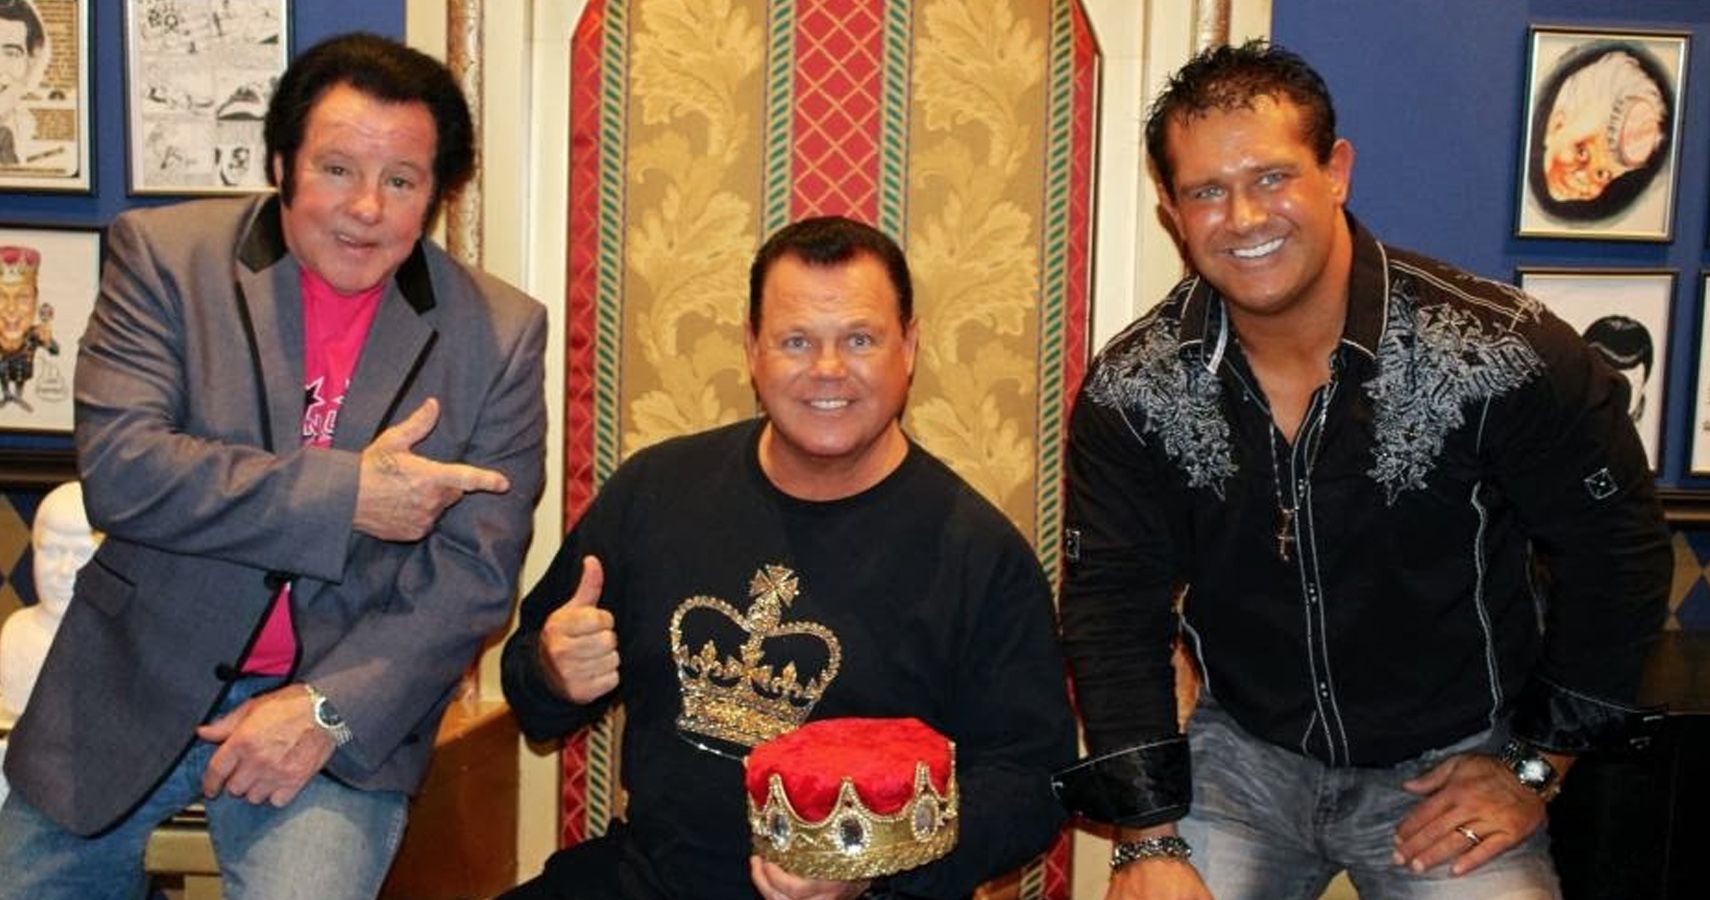 Bill Dundee, Jerry Lawler, and Grand Master Sexay